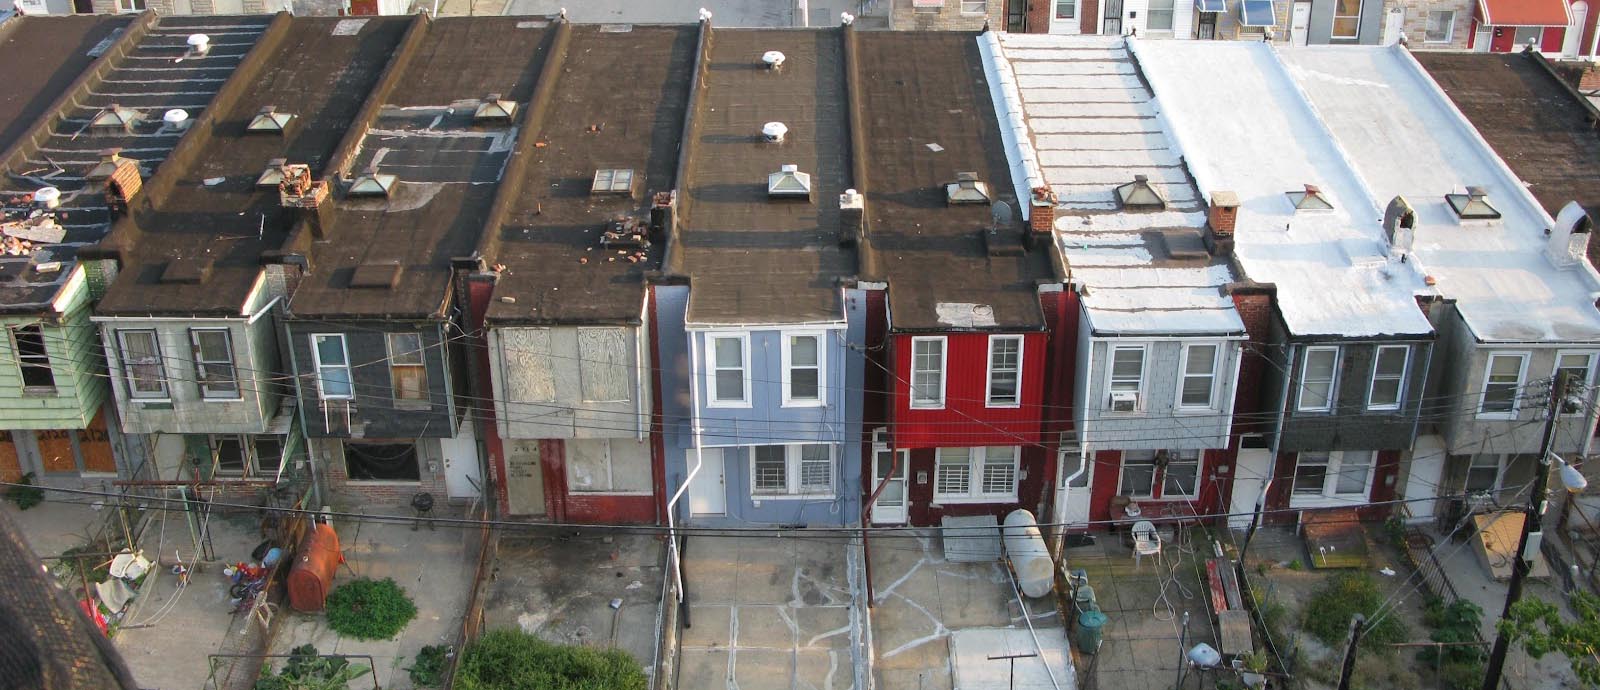 Three row houses have white roofs compared to the other houses